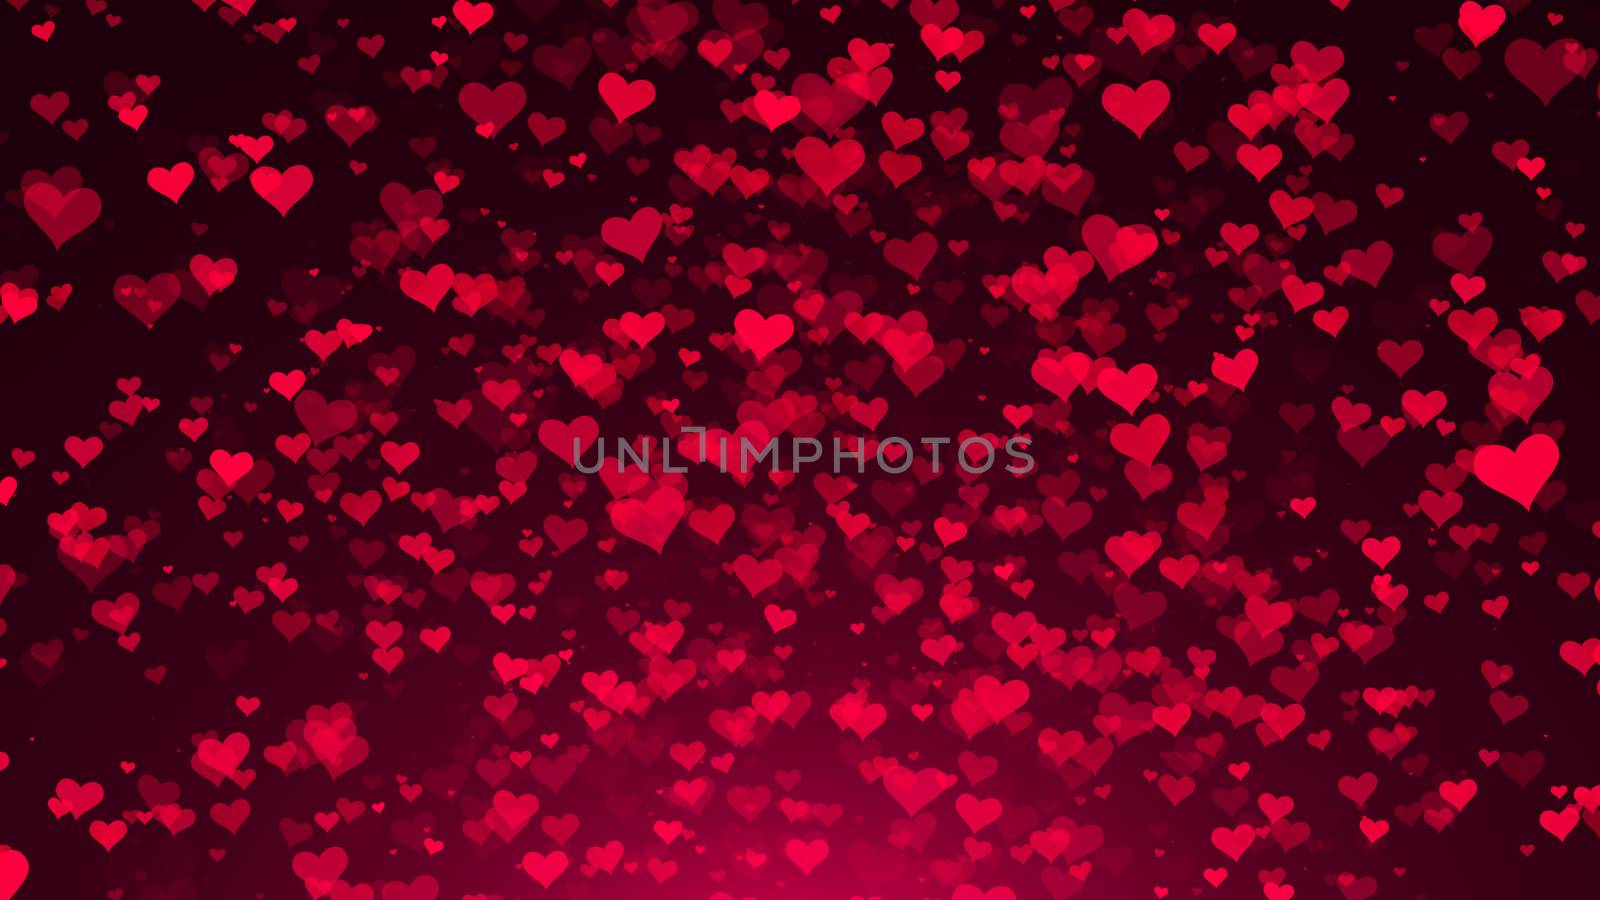 Abstract background with hearts. Digital illustration by nolimit046